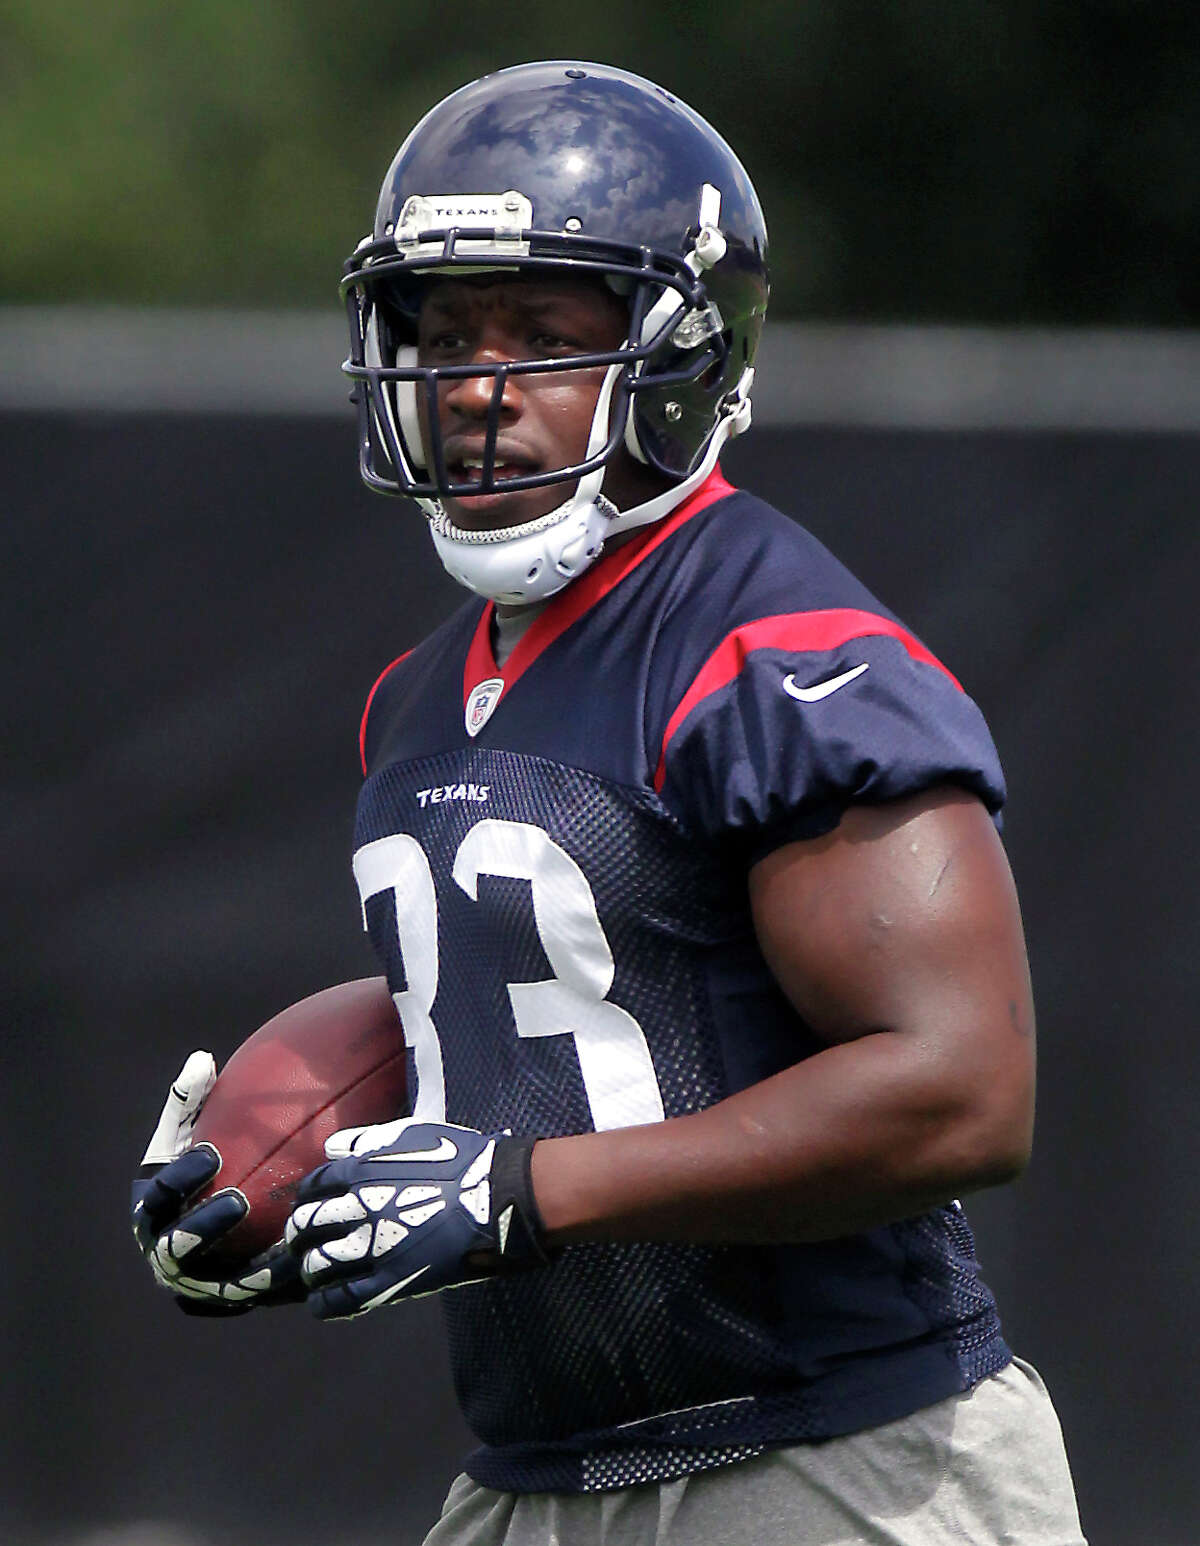 Andre Brown starts his tenure with the Texans as an early favorite to claim the backup running back job.